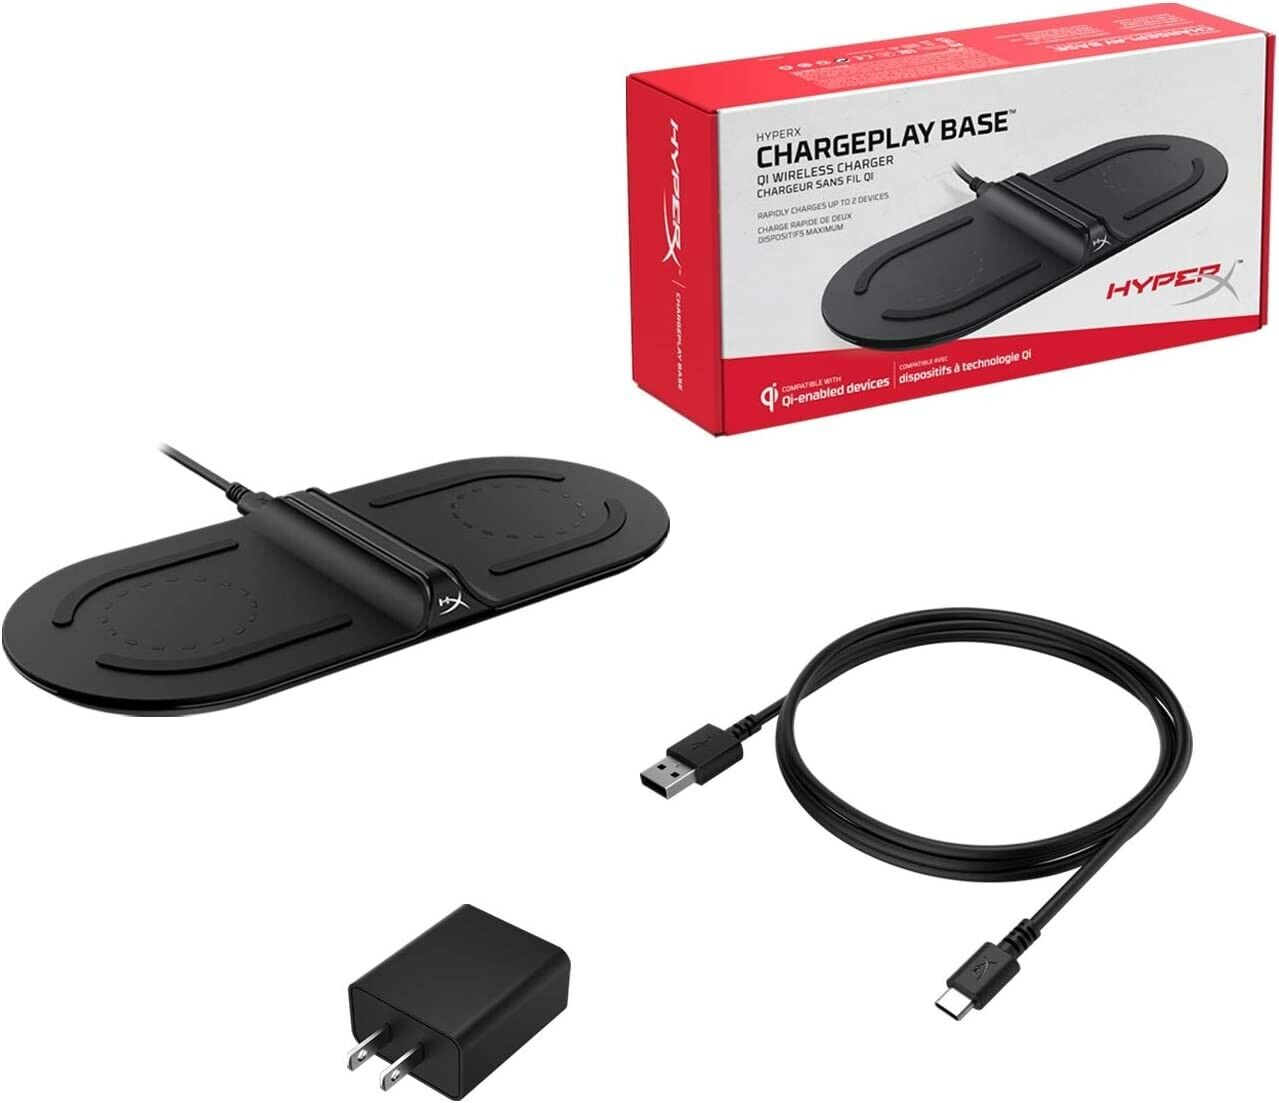 HyperX Chargeplay Base - Qi Wireless Charger, Dual Wireless Charger